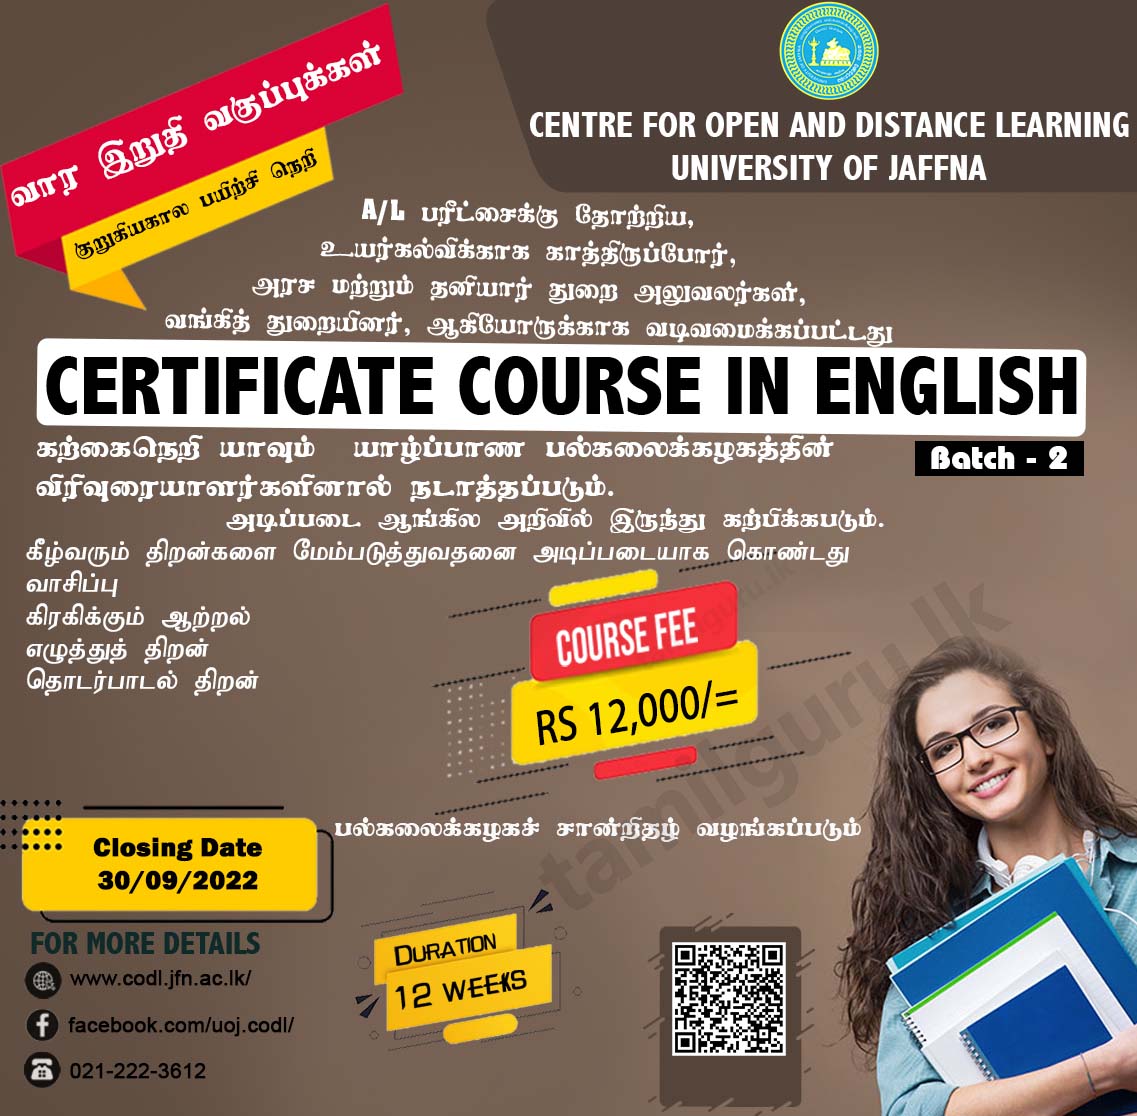 Certificate Course in English (2022) - University of Jaffna - Application